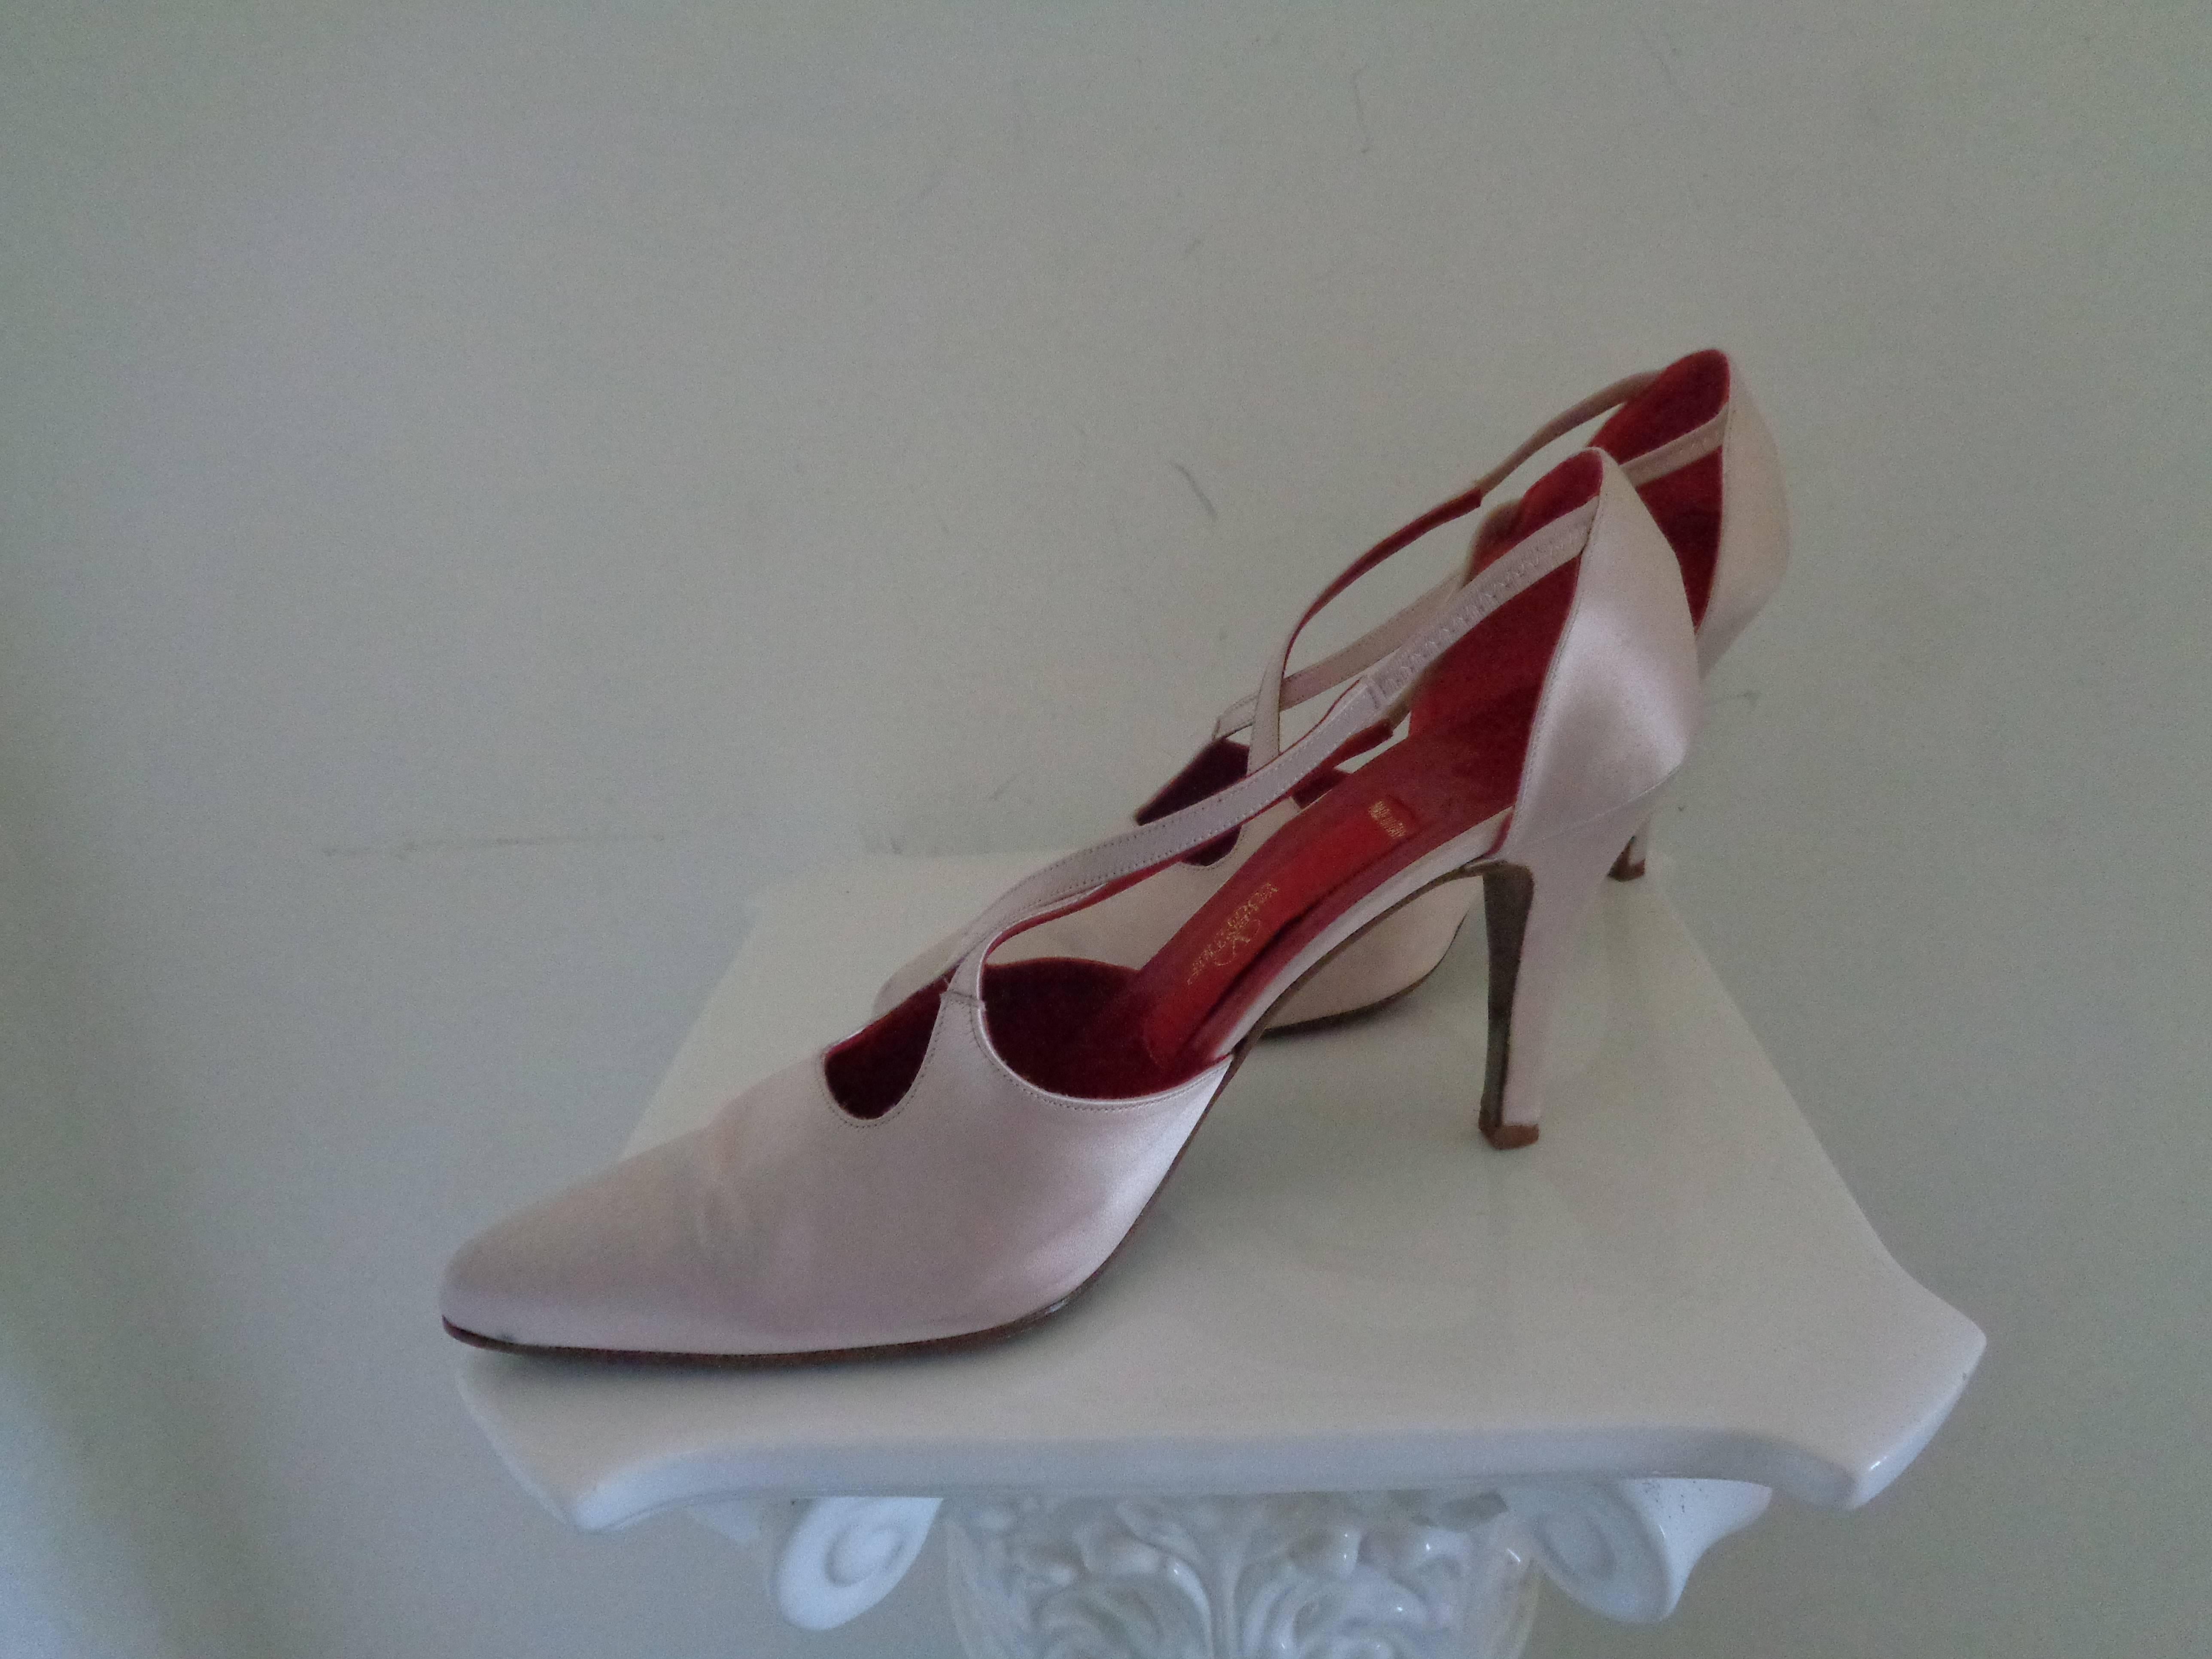 Valentino Couture Pink Sandals

totally made in italy in size 39

In good conditions, used few times

Heel lenght: 10 cm